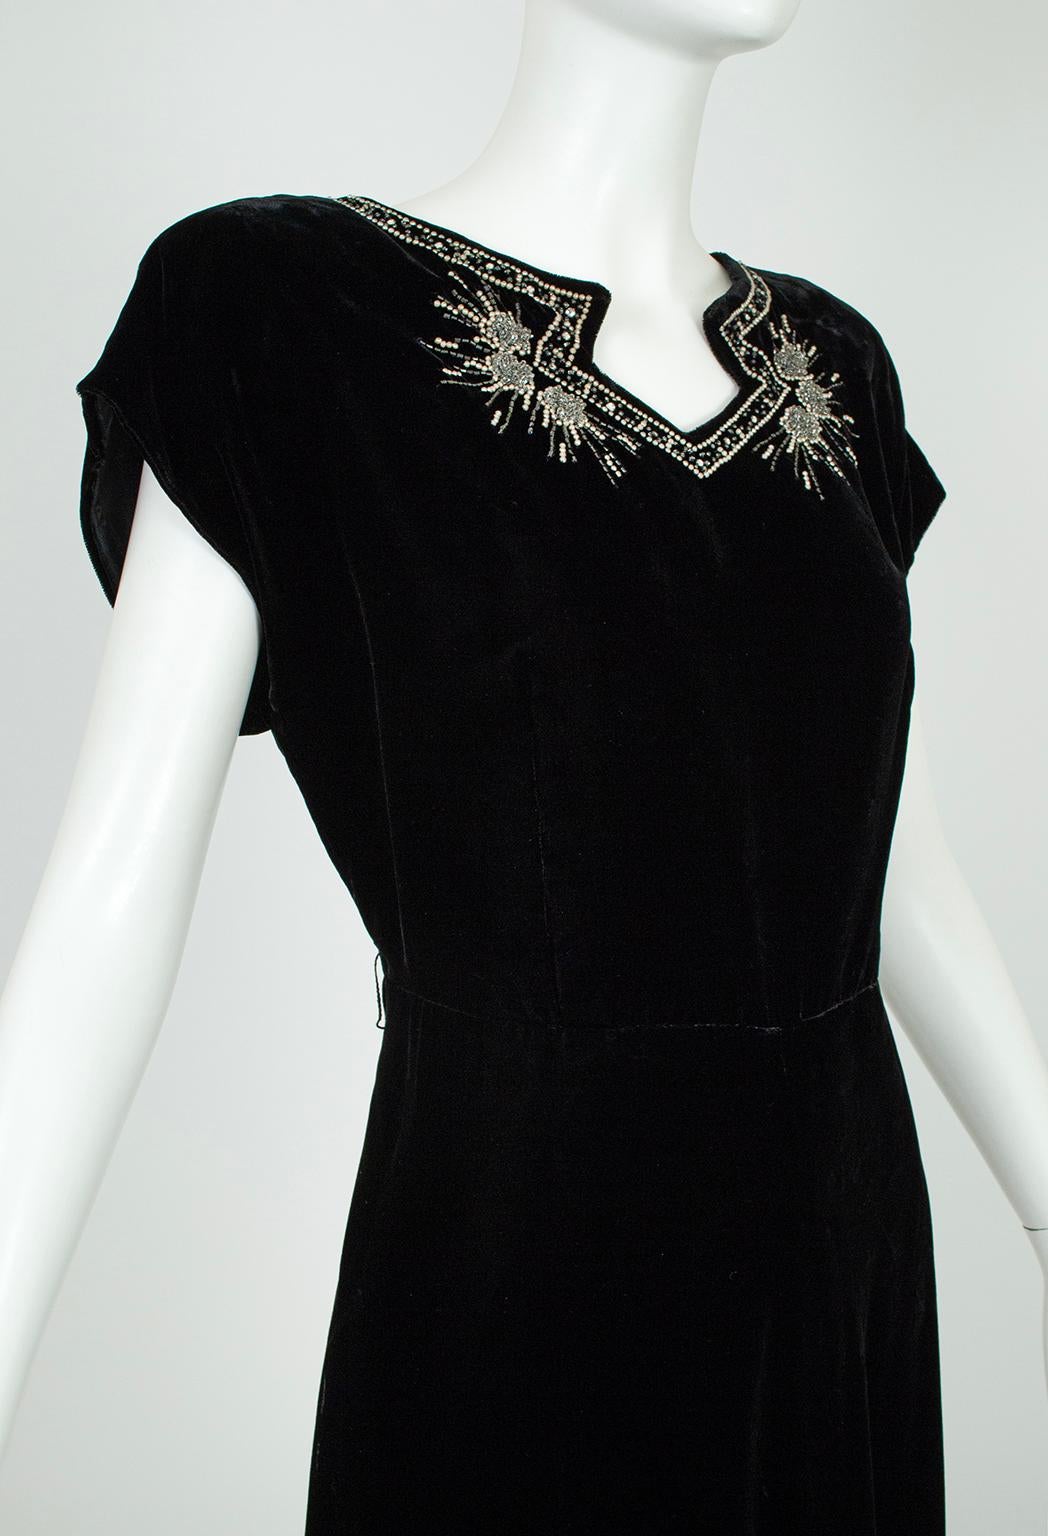 Pre-War Black Velvet Art Deco Bead and Rhinestone Cocktail Dress – L, 1940s In Good Condition For Sale In Tucson, AZ